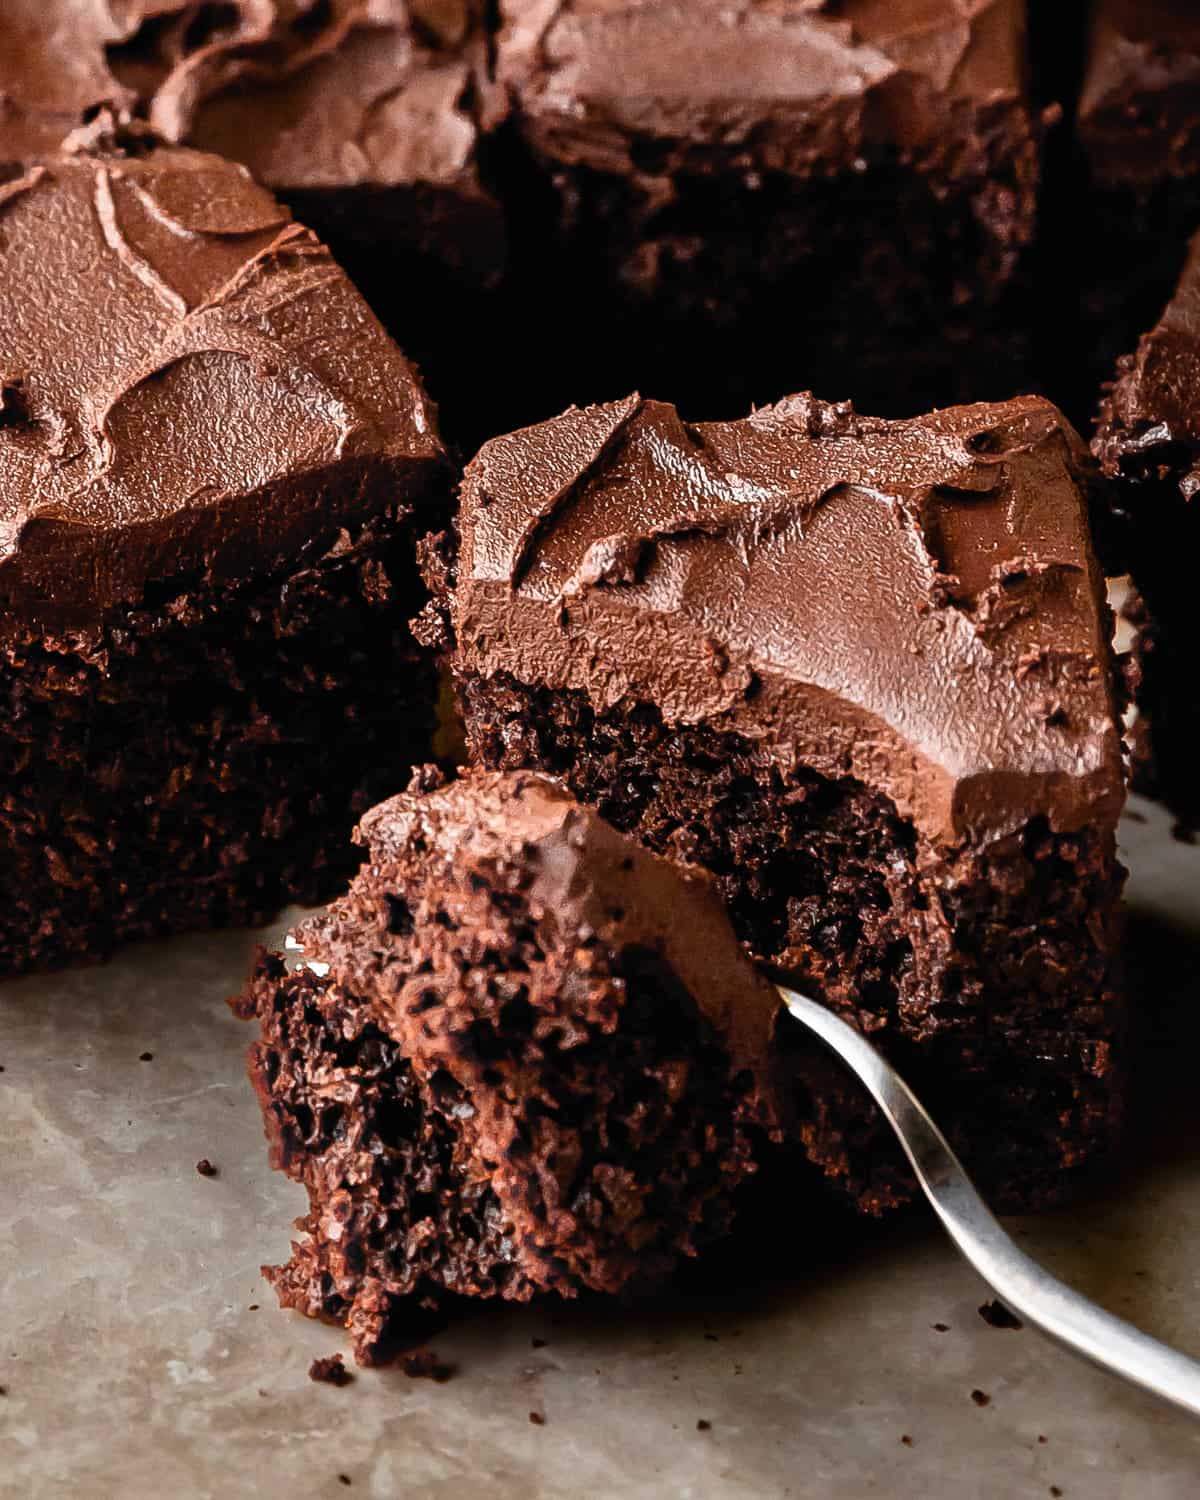 Chocolate fudge cake is a rich, dense moist and fudgy chocolate cake topped with a creamy chocolate ganache frosting. This fudge cake recipe is easy to make in one bowl and is the perfect simple, but decadent fudgy chocolate cake.